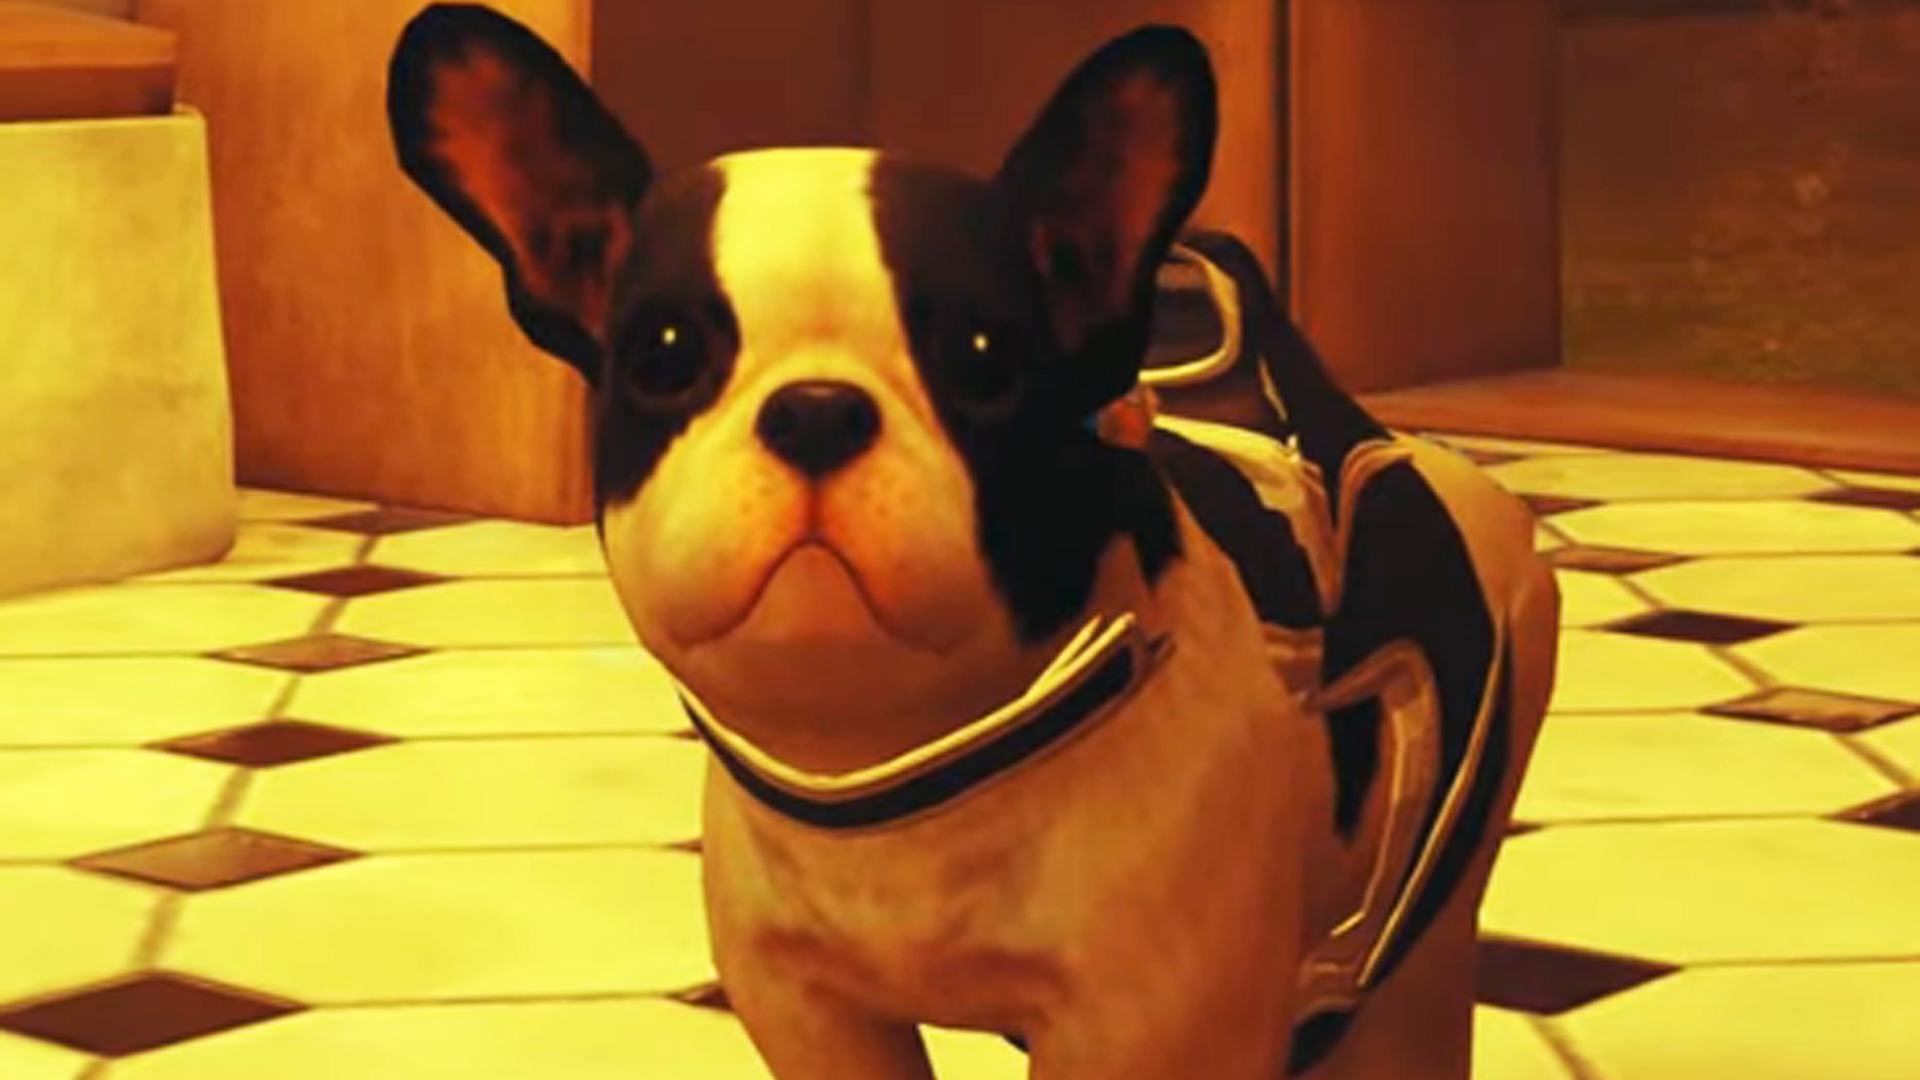 You can play Stray with cute puppy dog instead